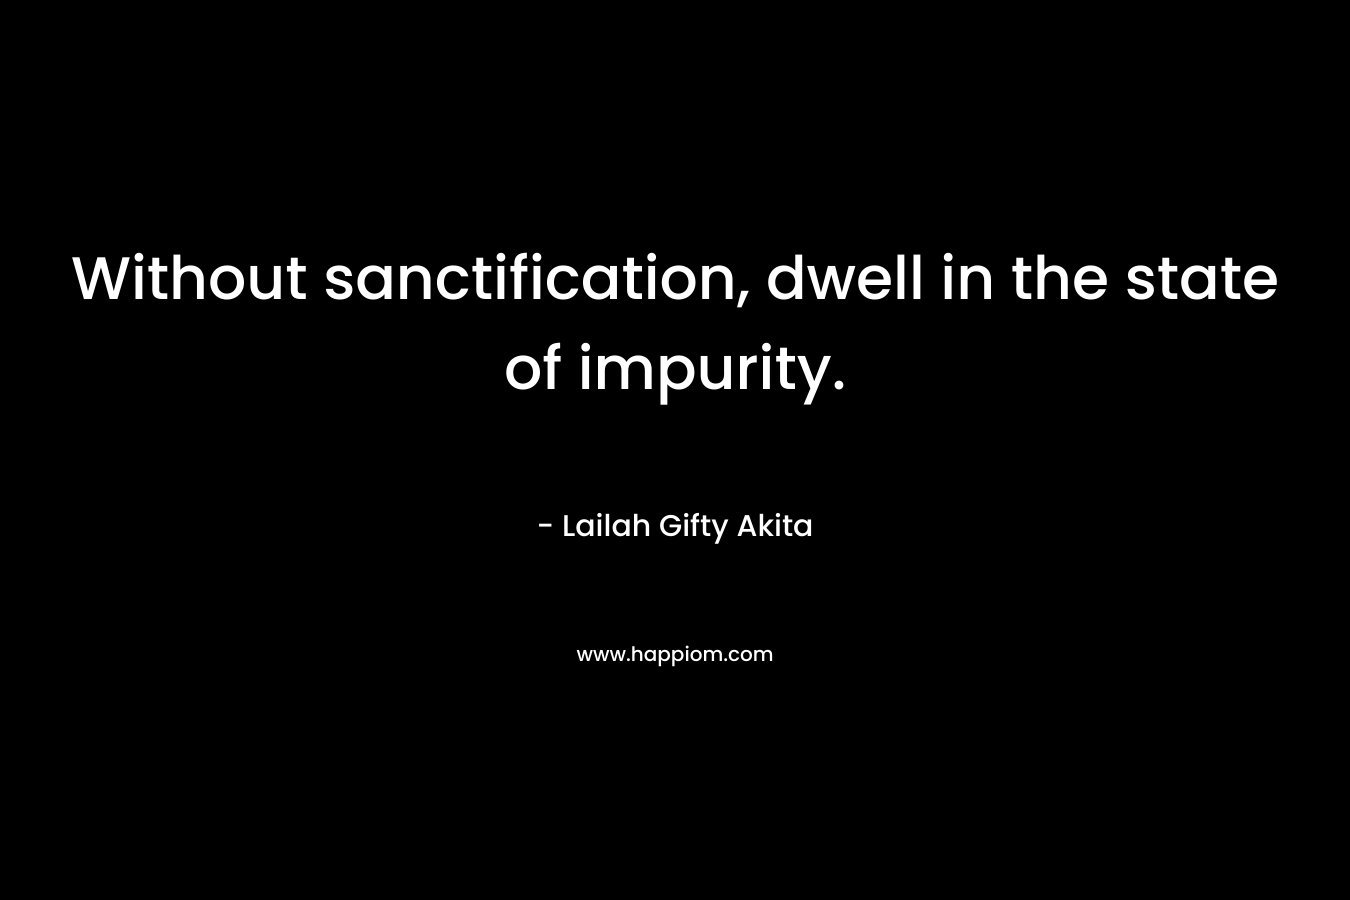 Without sanctification, dwell in the state of impurity. – Lailah Gifty Akita